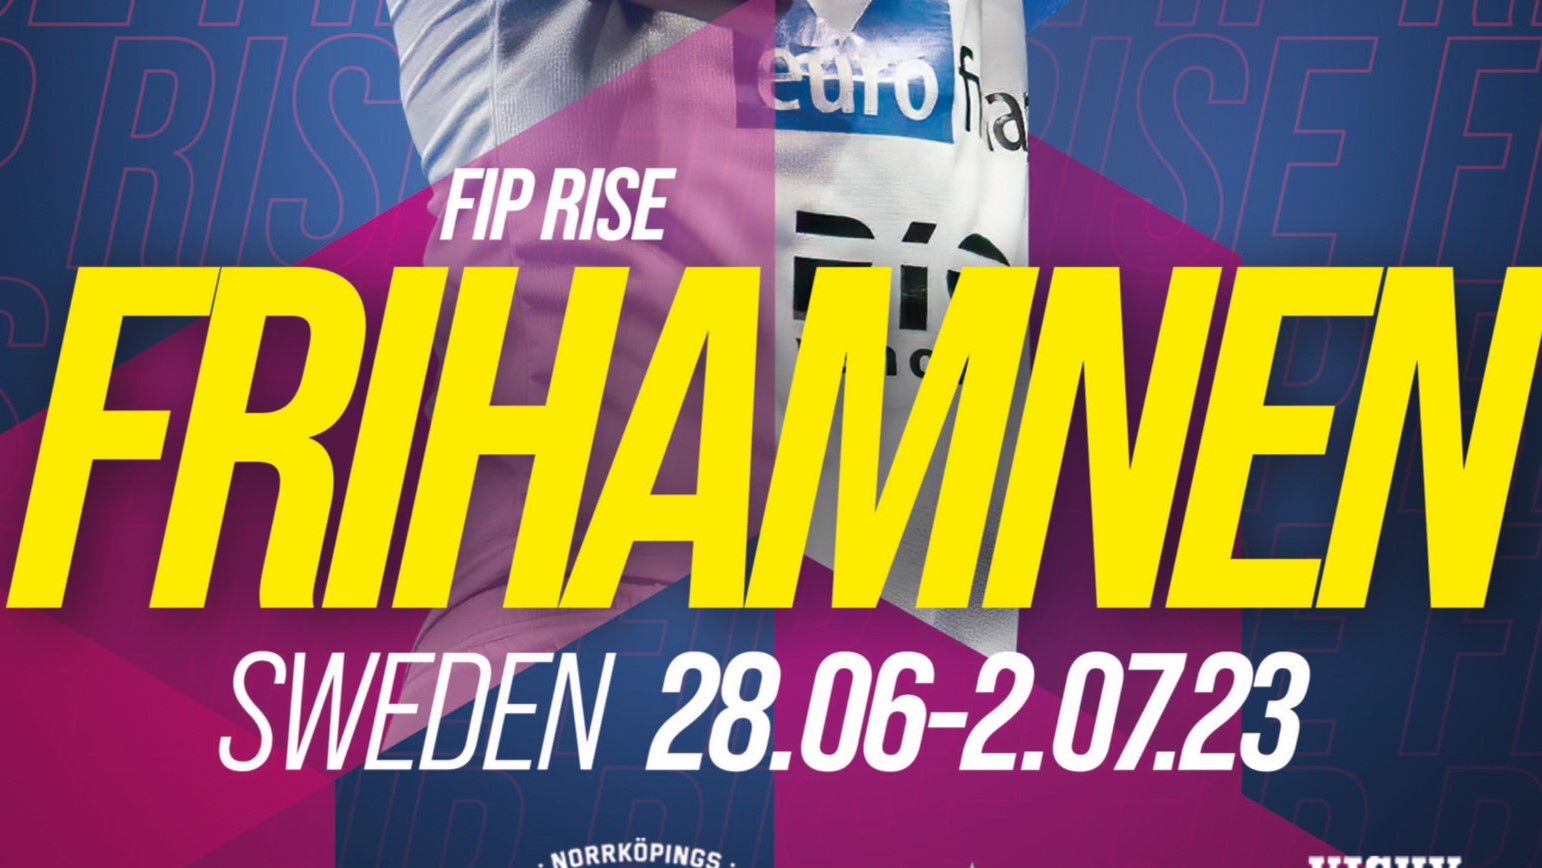 FRIHAMNEN_RISE_Poster-scaled - Copia